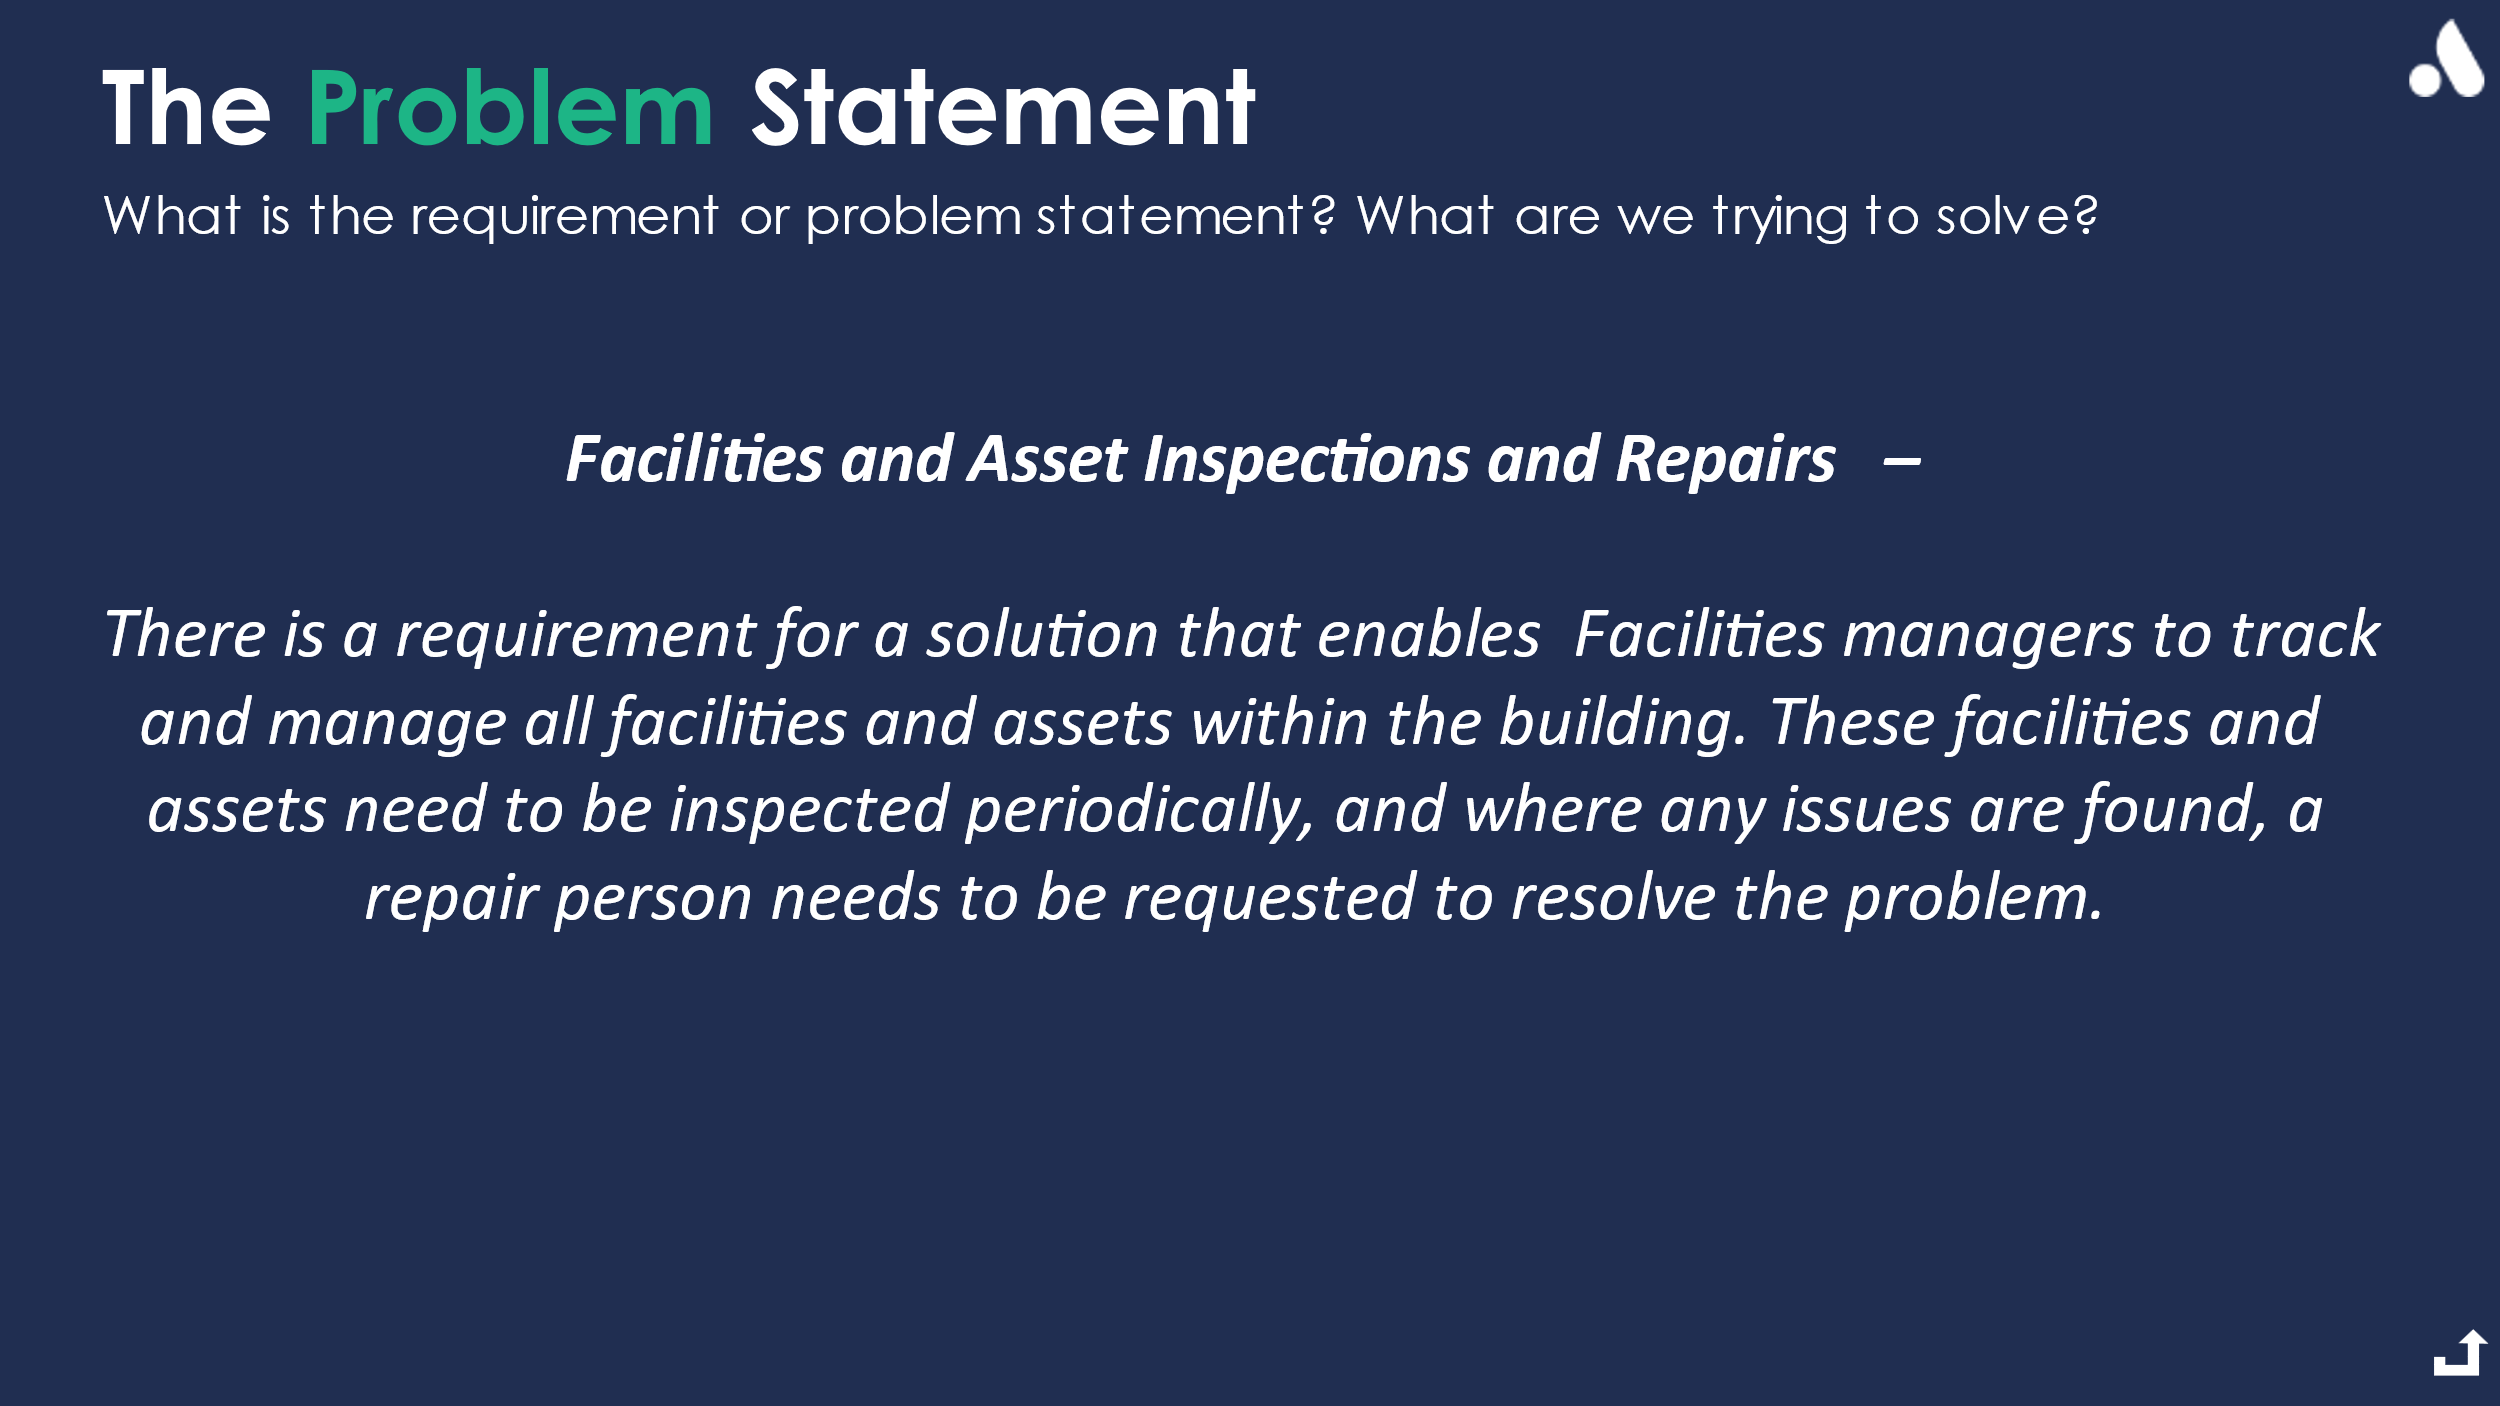 Figure 4: The facilities and asset management problem statement